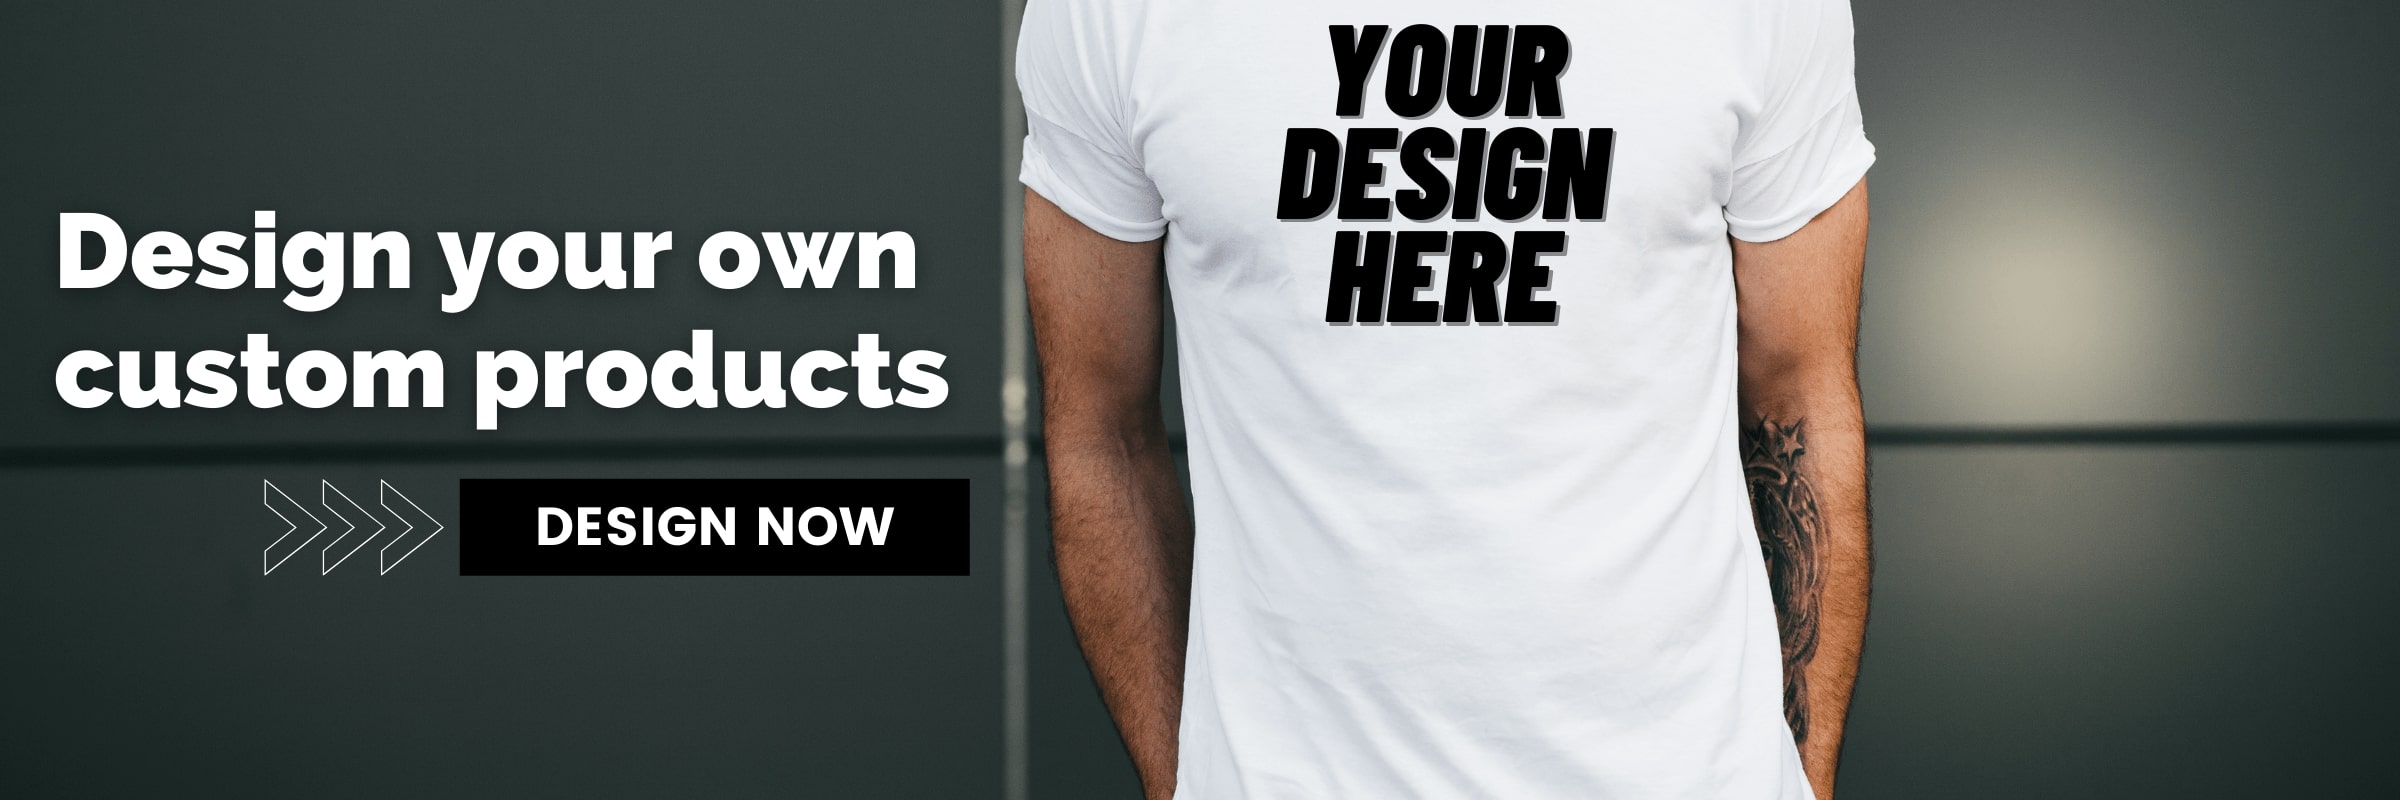 Design your own custome products